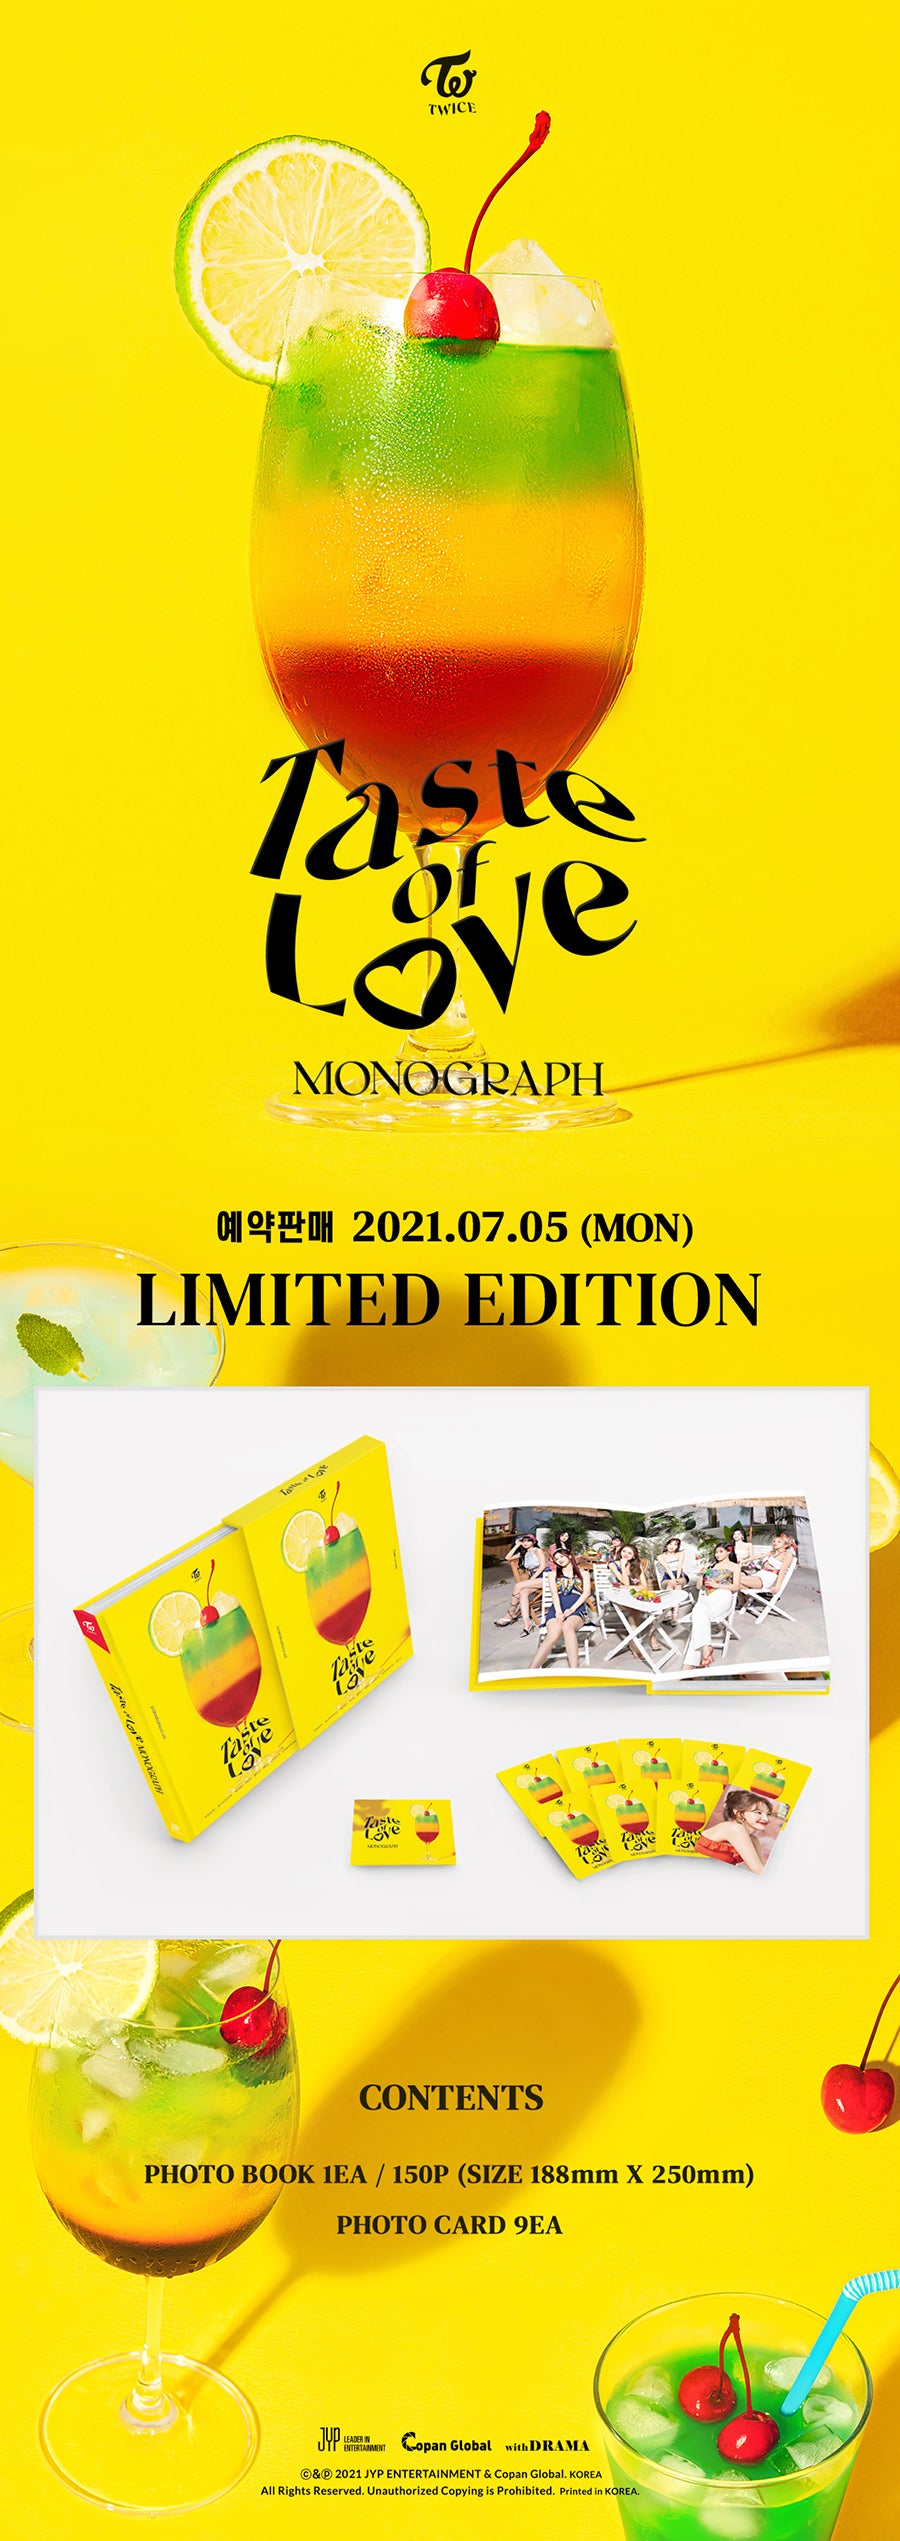 Twice Monograph Taste Of Love Limited Edition Subk Shop